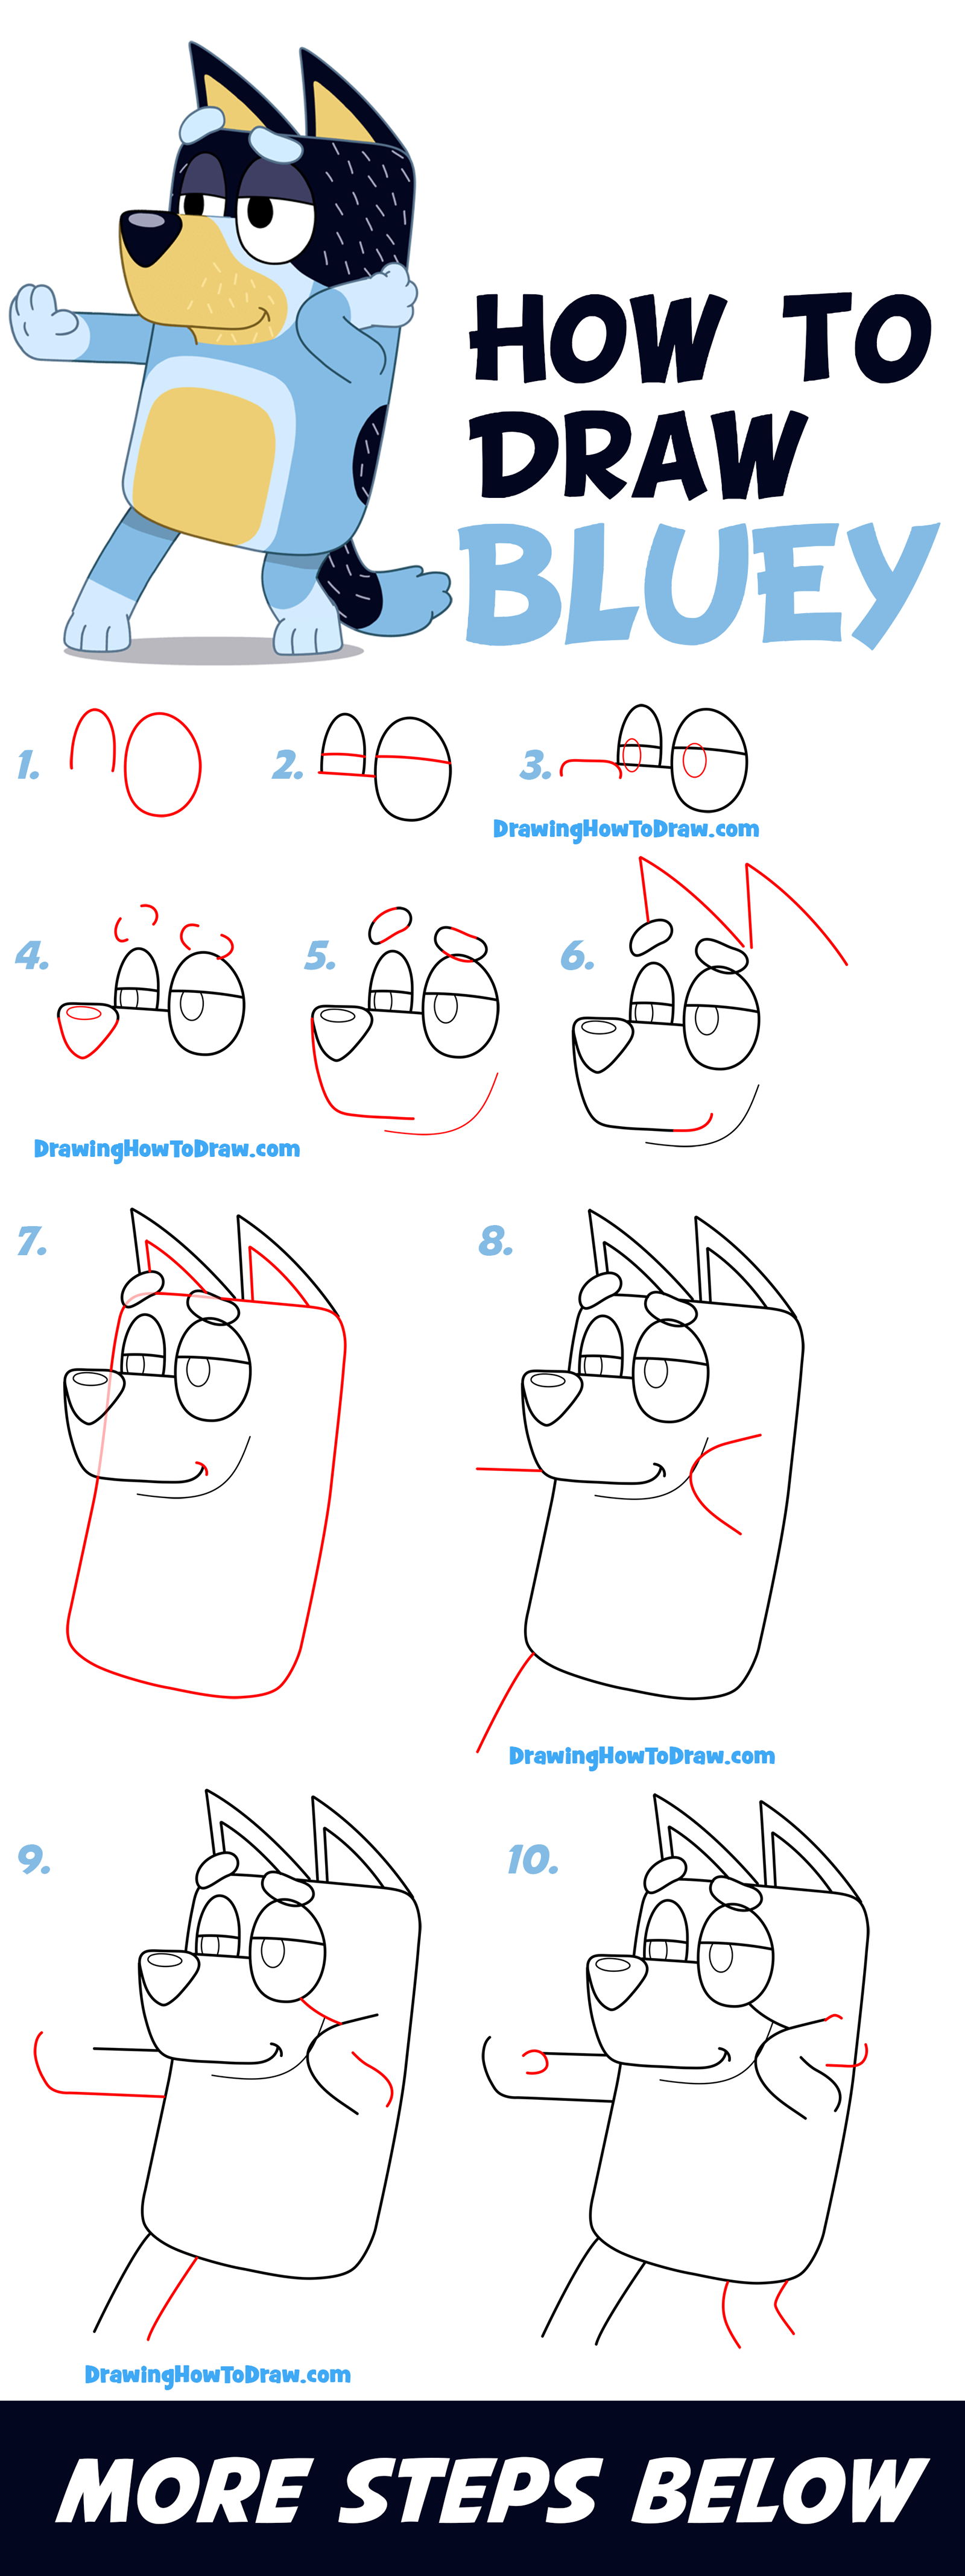 Learn How to Draw Bluey Muffin from Bluey Easy Step-by-Step Drawing Tutorial for Kids